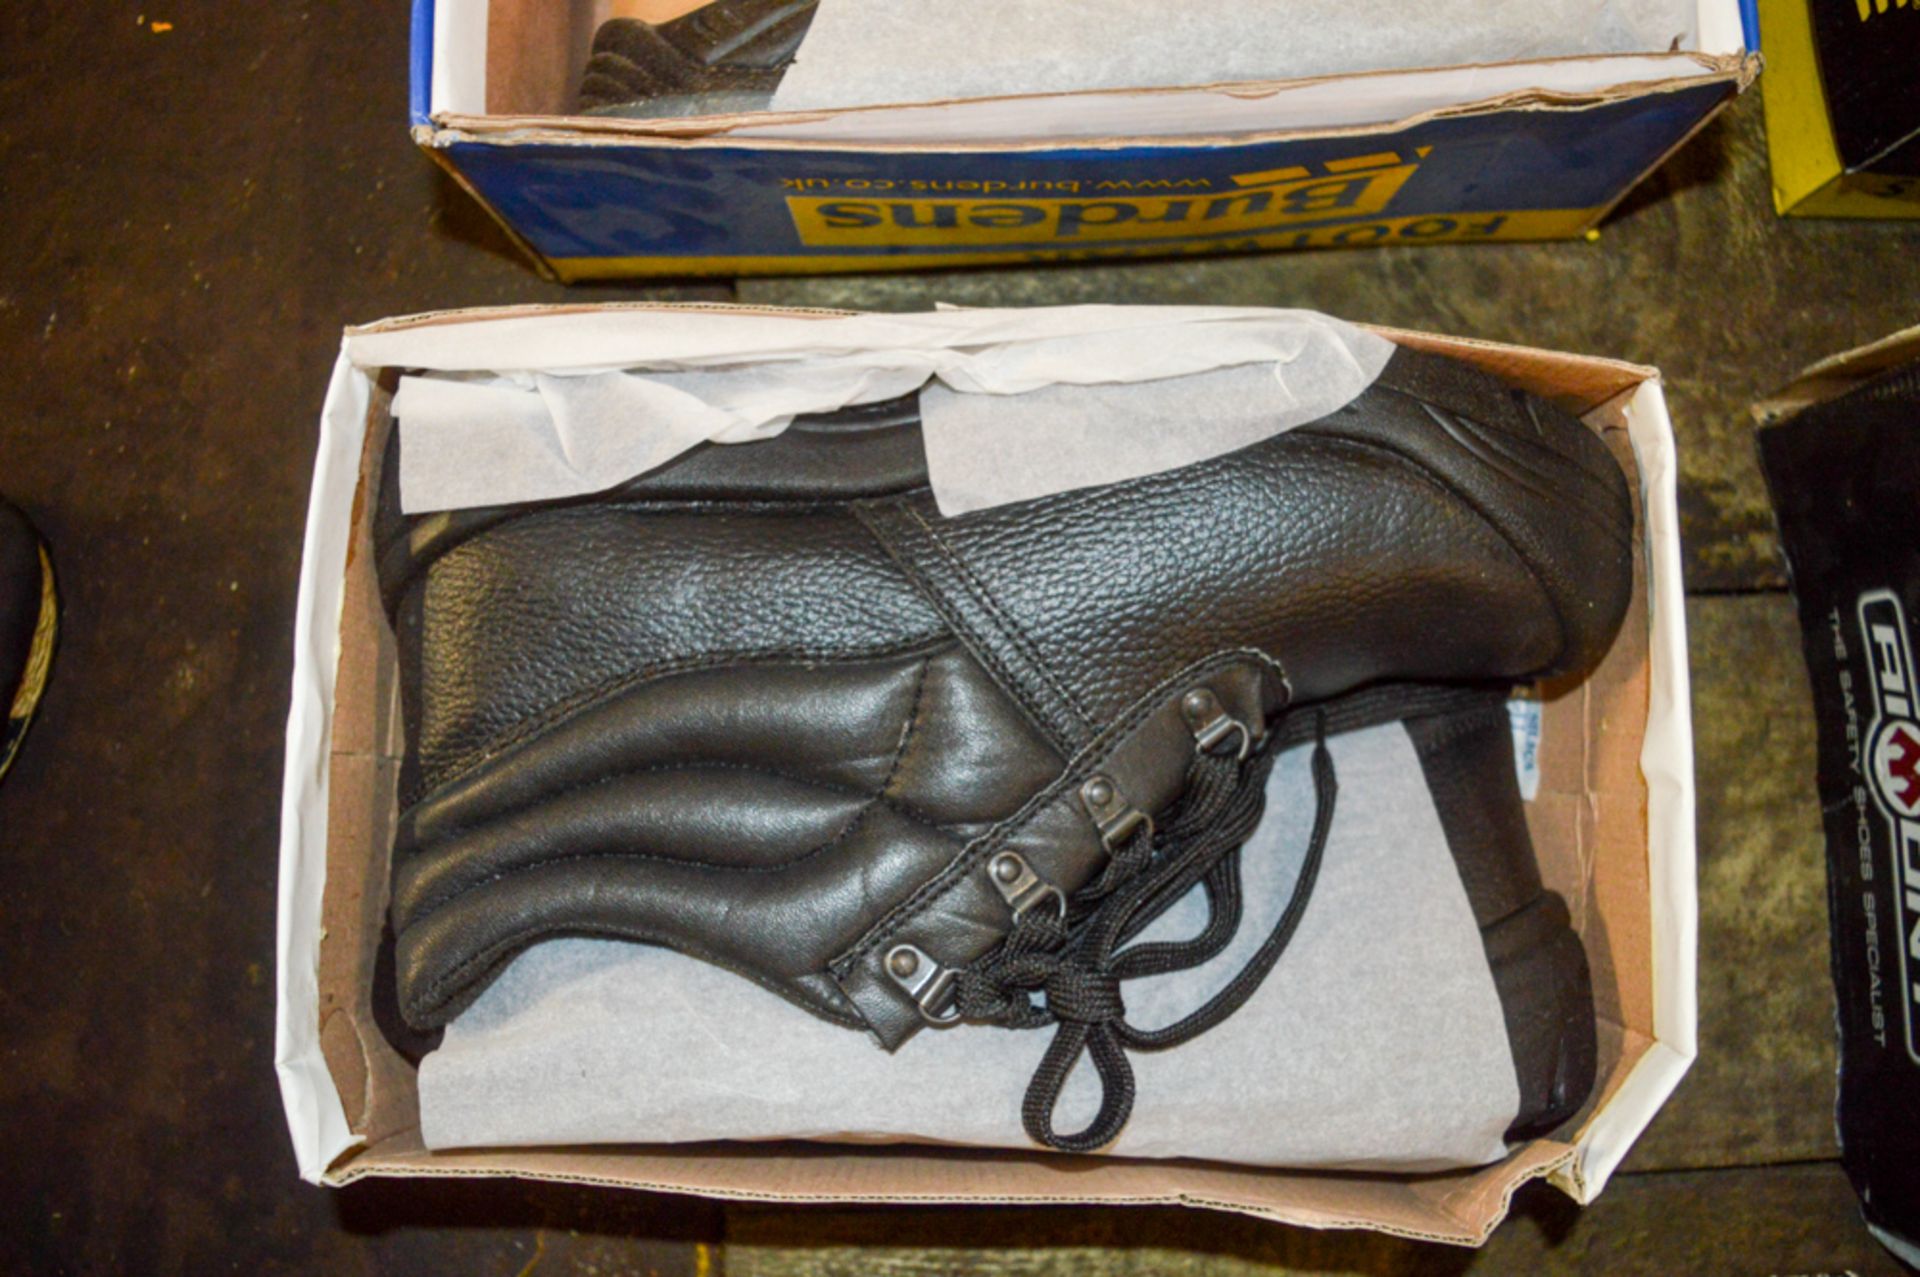 Pair of black safety boots Size 12 New & unused